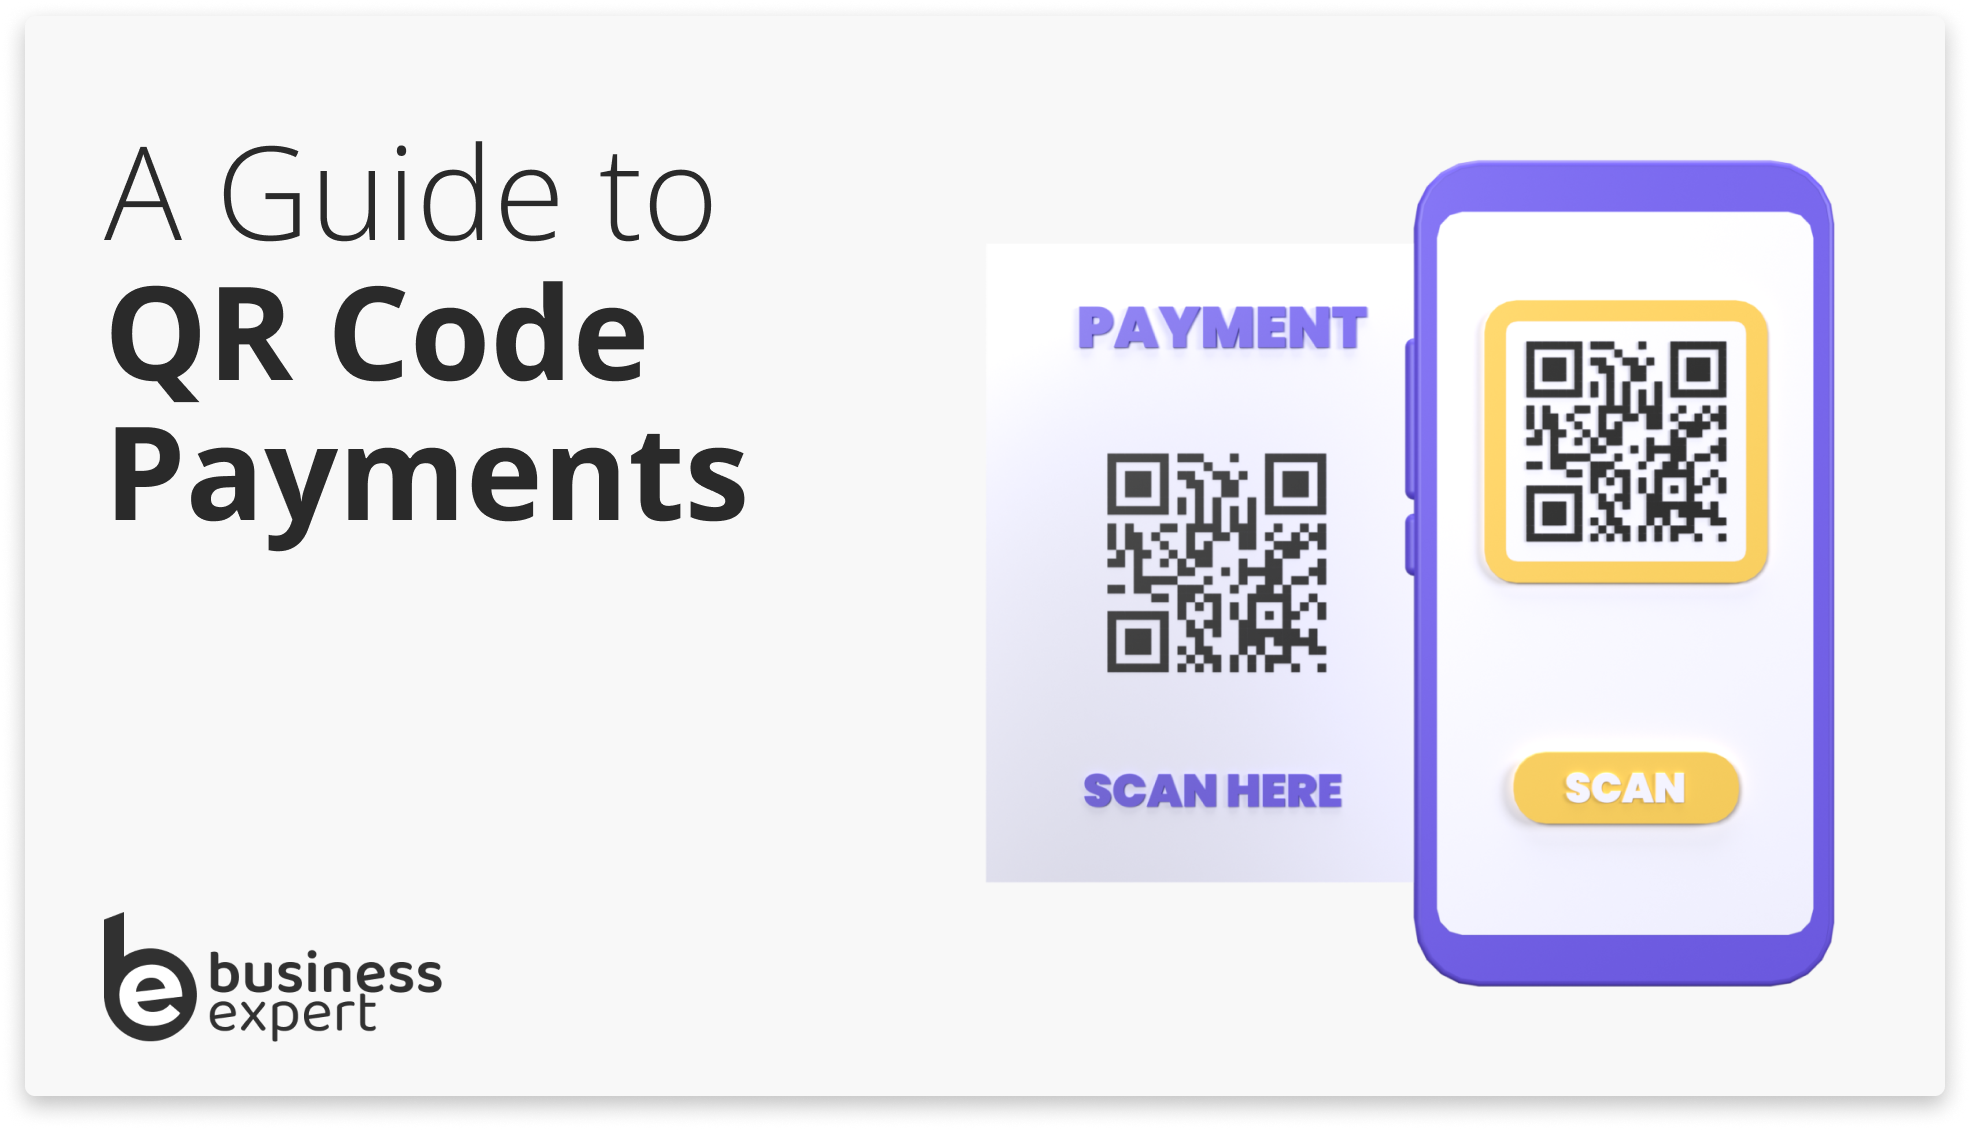 QR Code Payments: A Guide